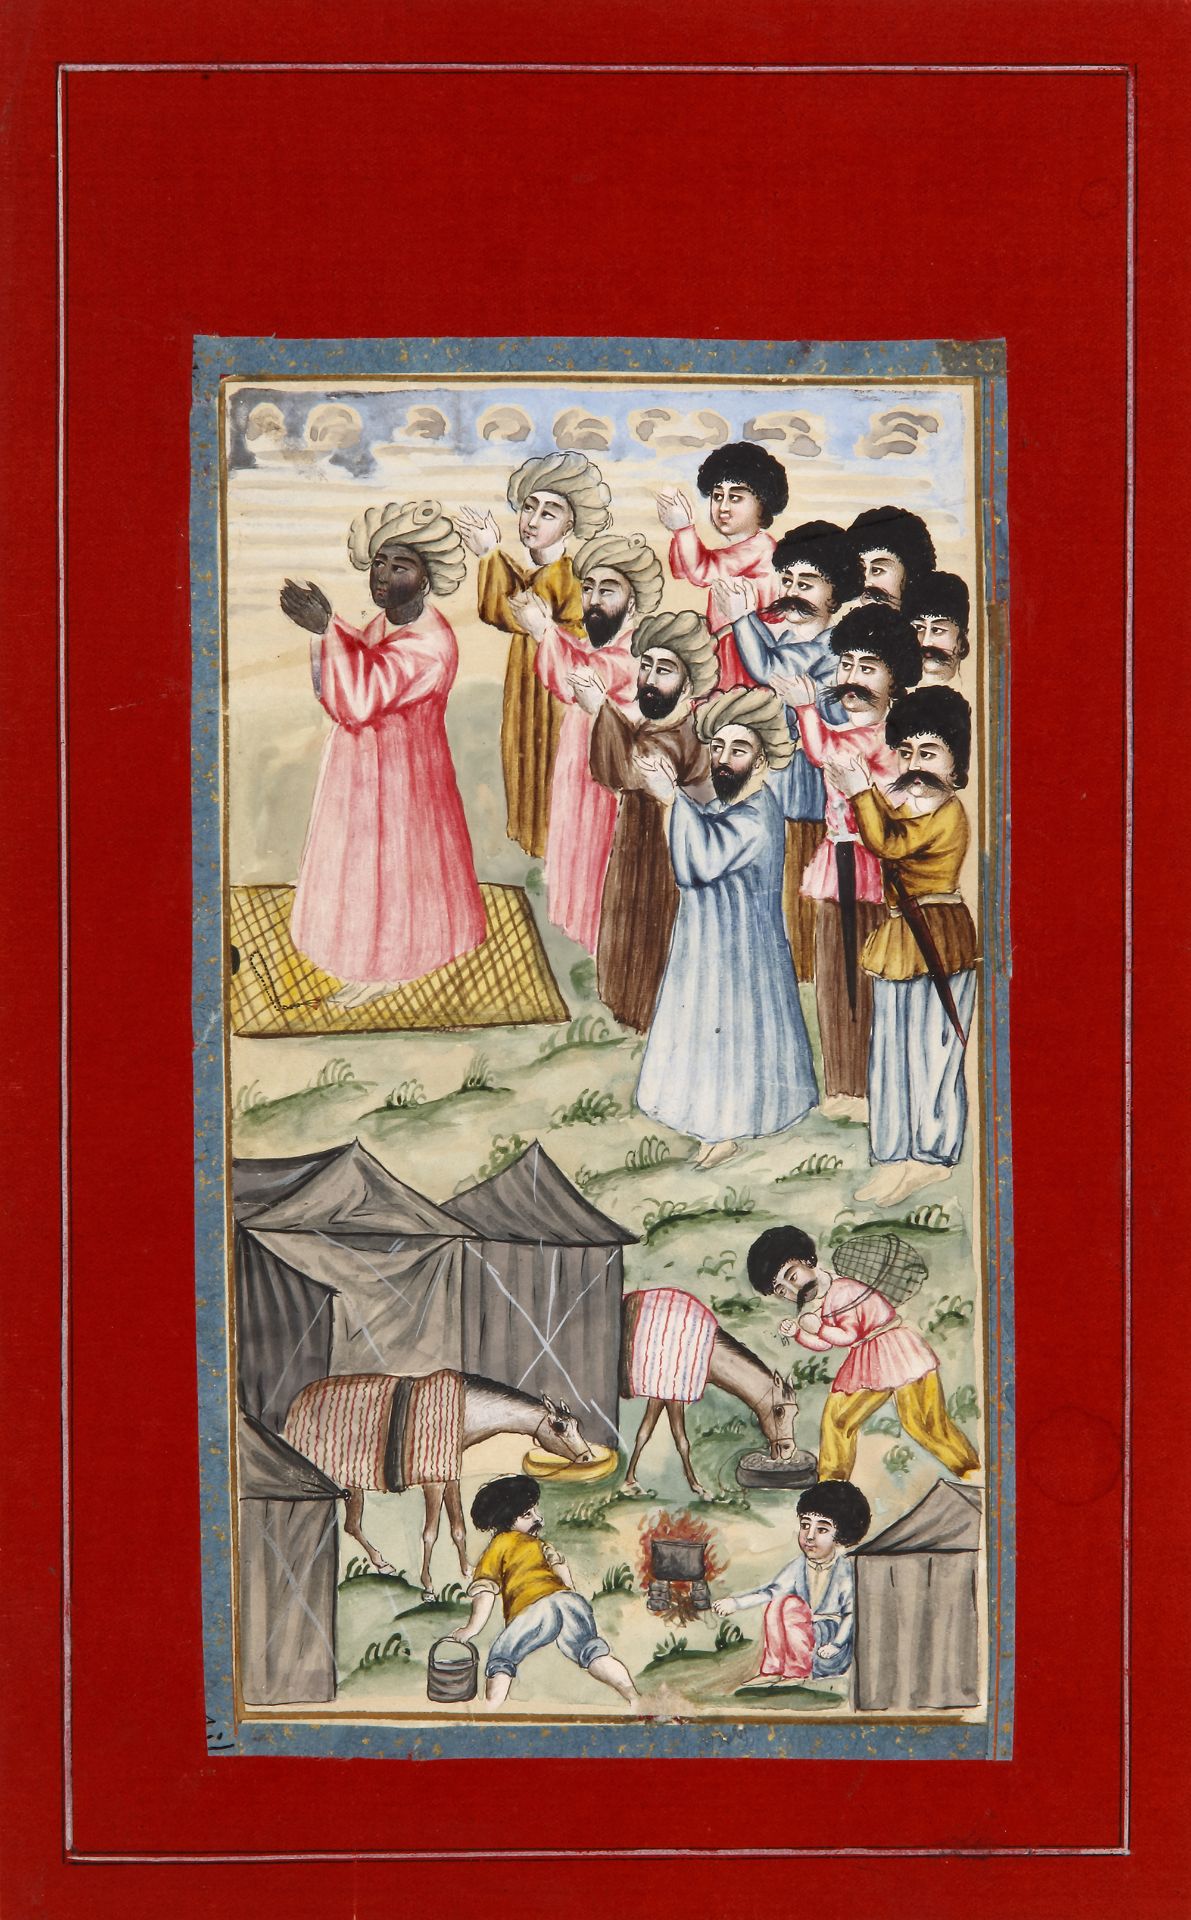 A PERSIAN MINIATURE DEPICTING A GROUP DURING PRAYER, LATE 18TH CENTURY - Image 2 of 4